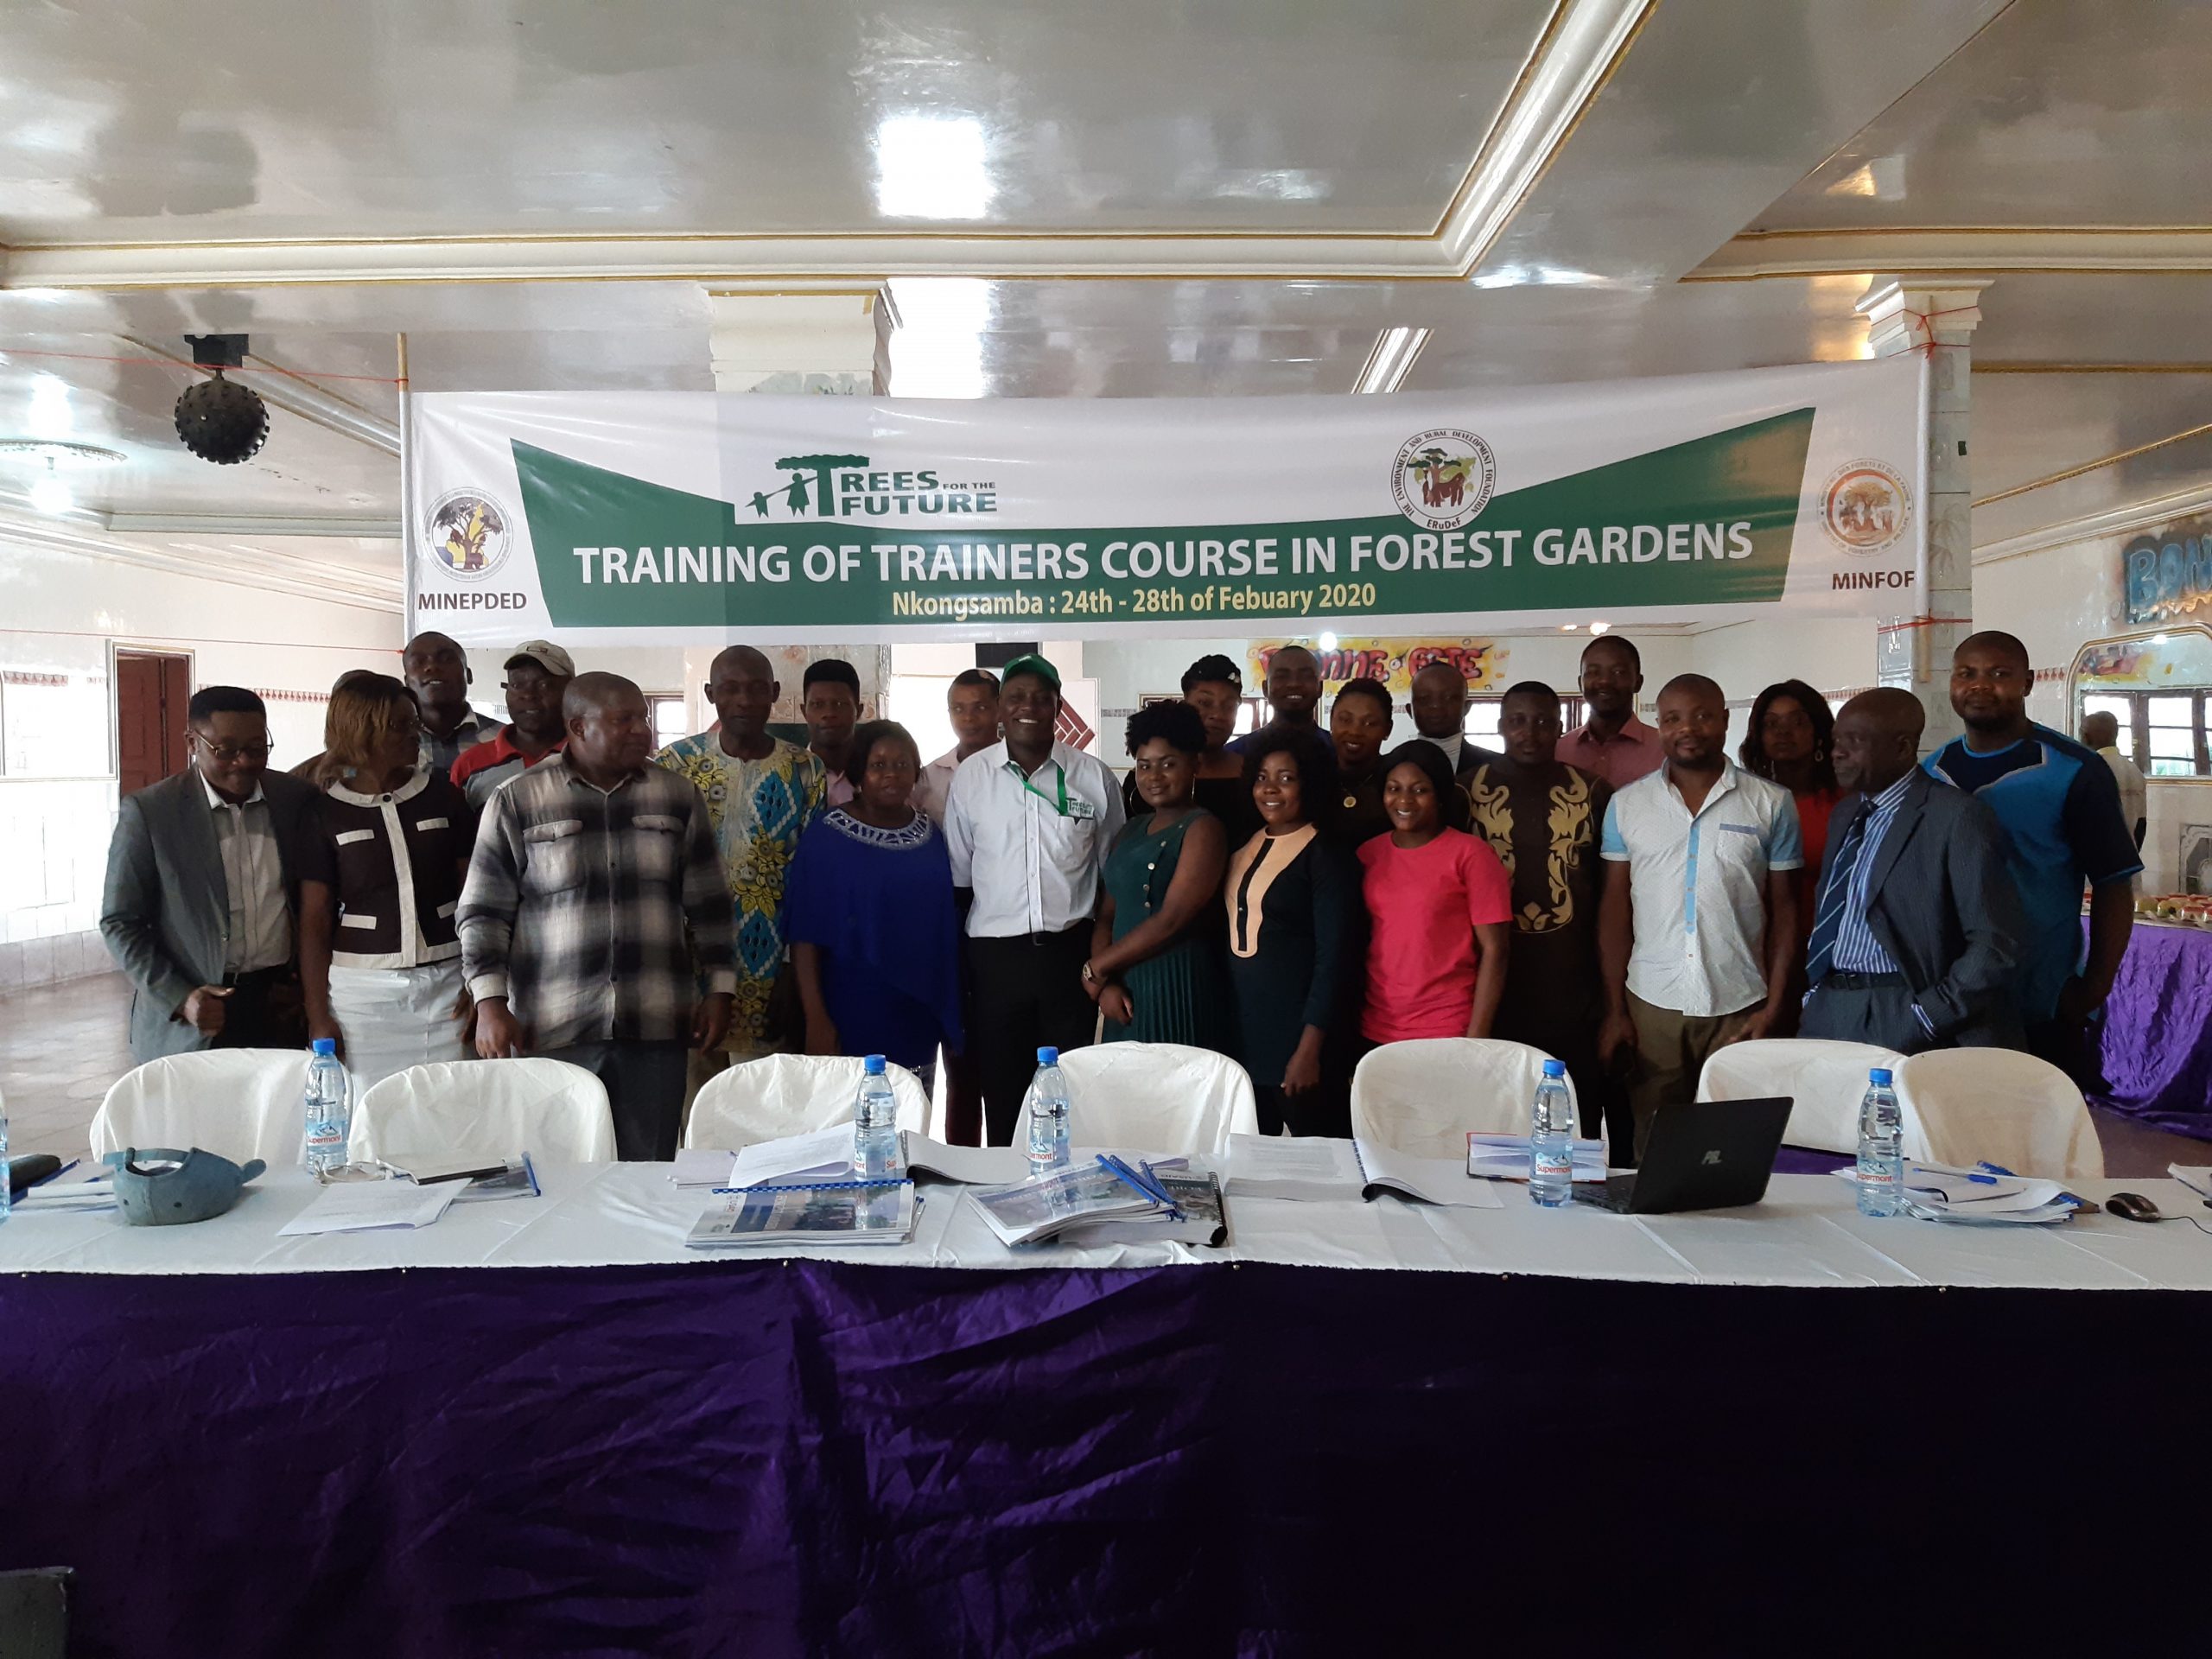 The training of trainers on Forest Gardens